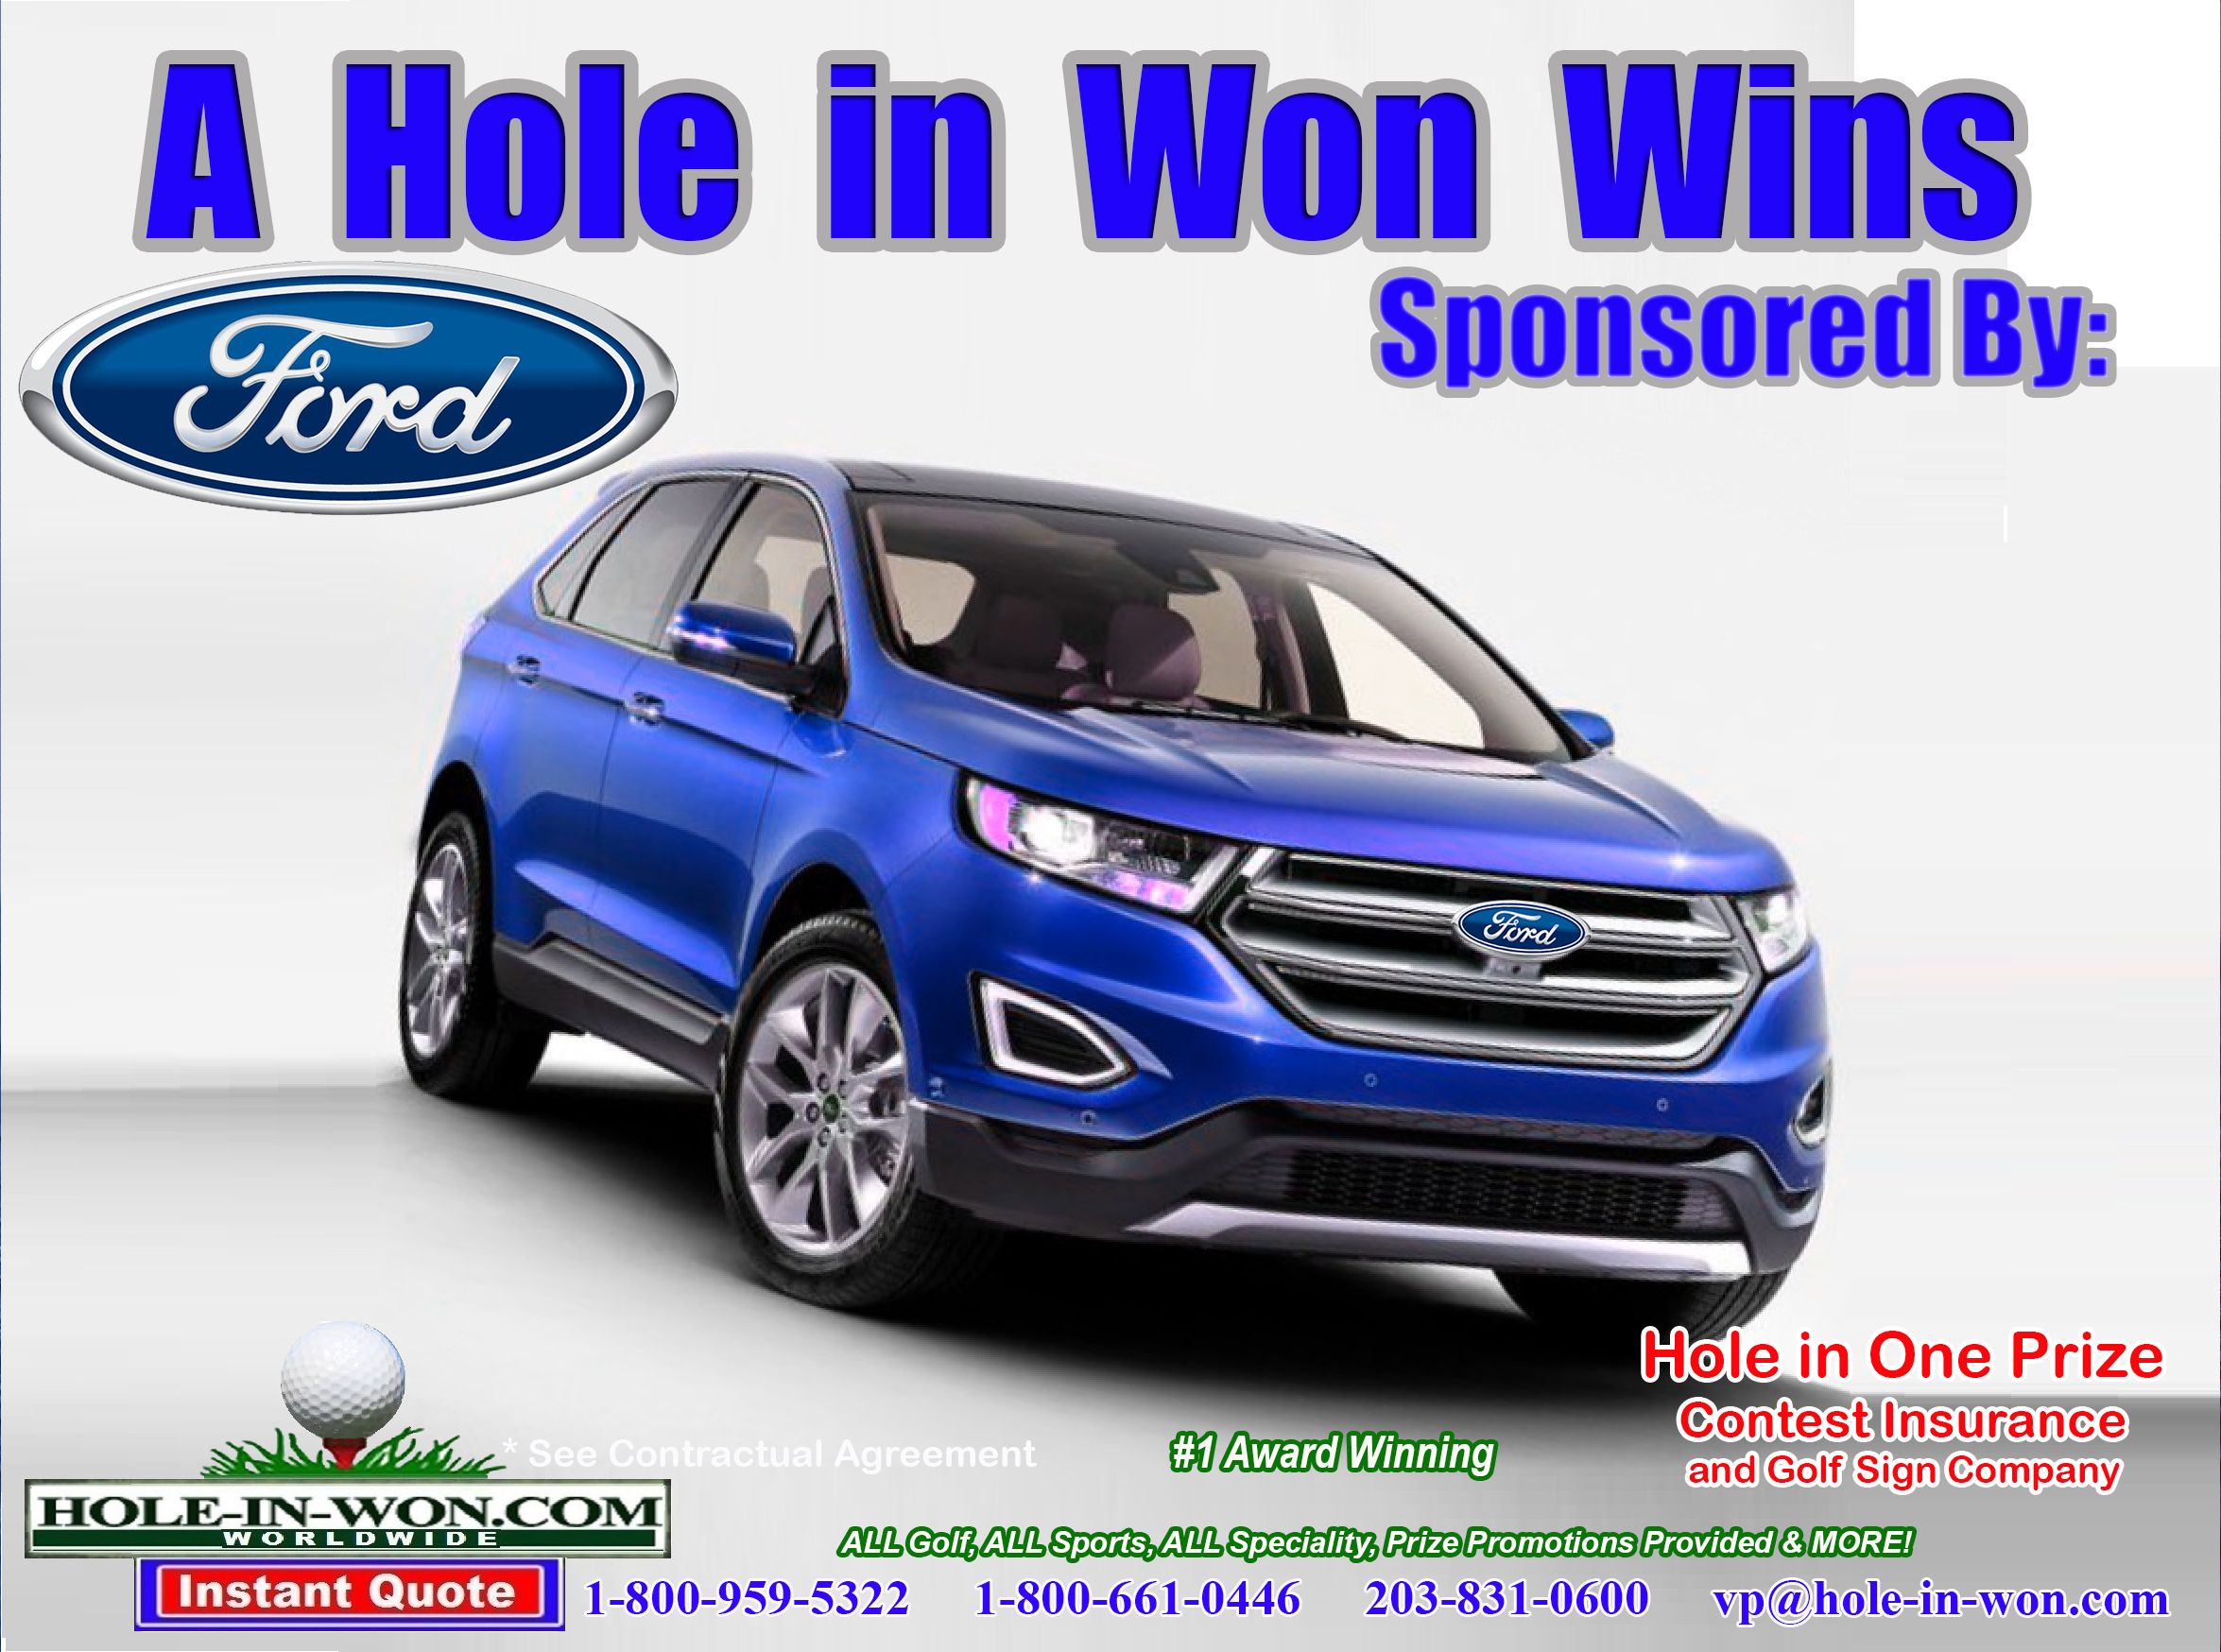 Ford hole in one program #7